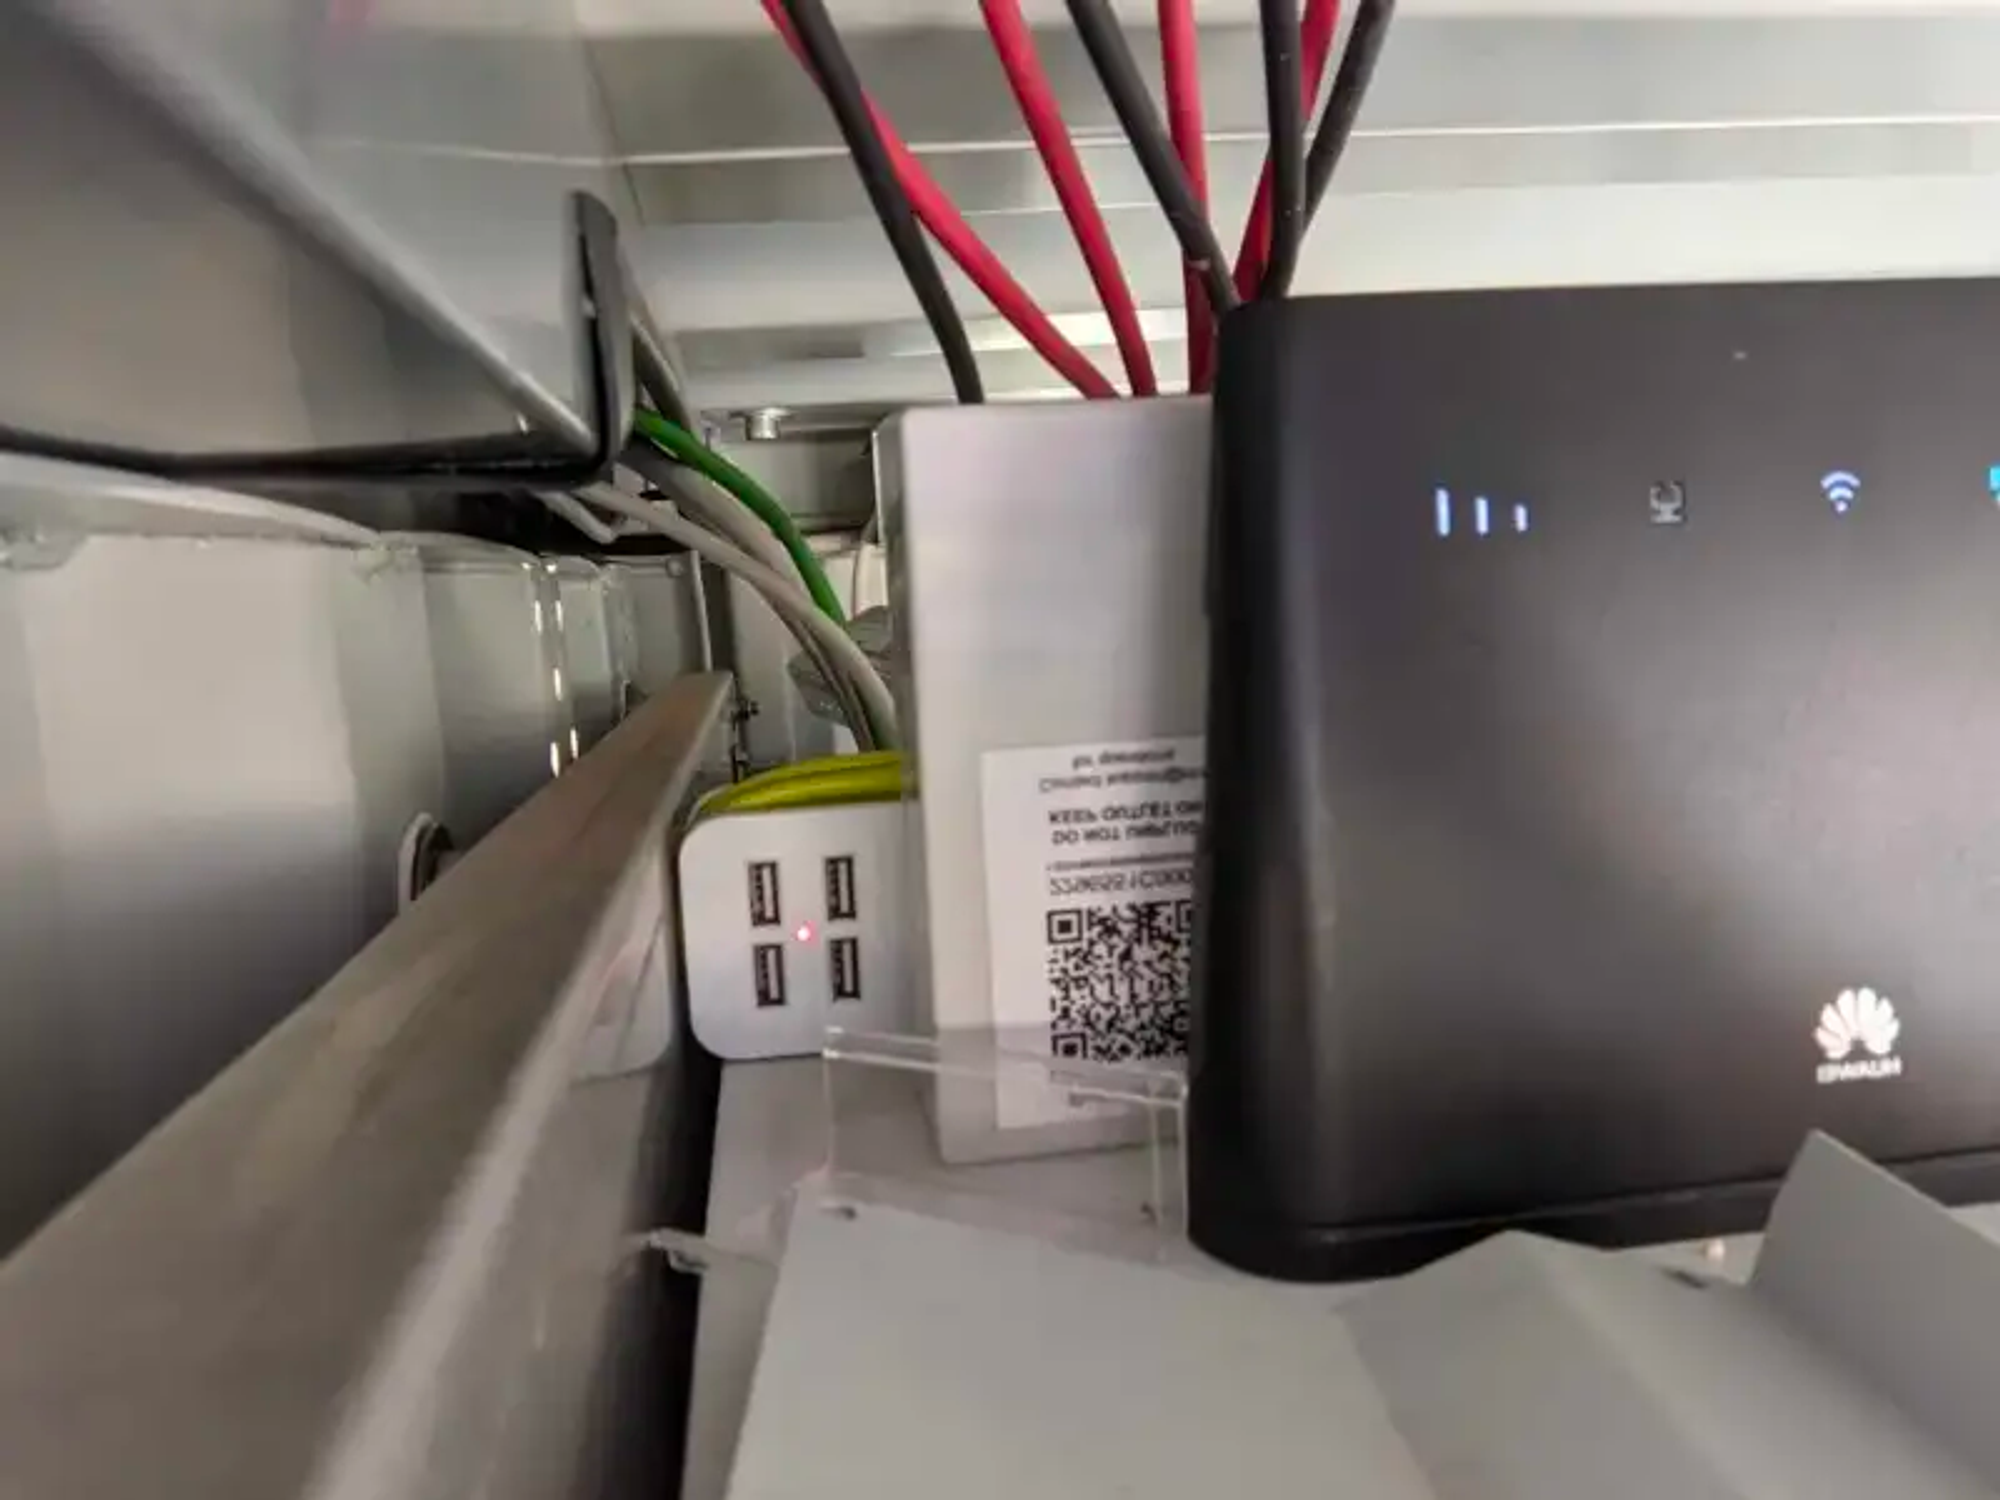 Figure 5: Left: An OffGridBox unit at a clinic where we installed one of the sensors. Right: A sensor installed inside the box unit. The sensor is plugged into the power extension cord behind the WiFi box. (Note: the red and black cables are NOT associated with the sensor).